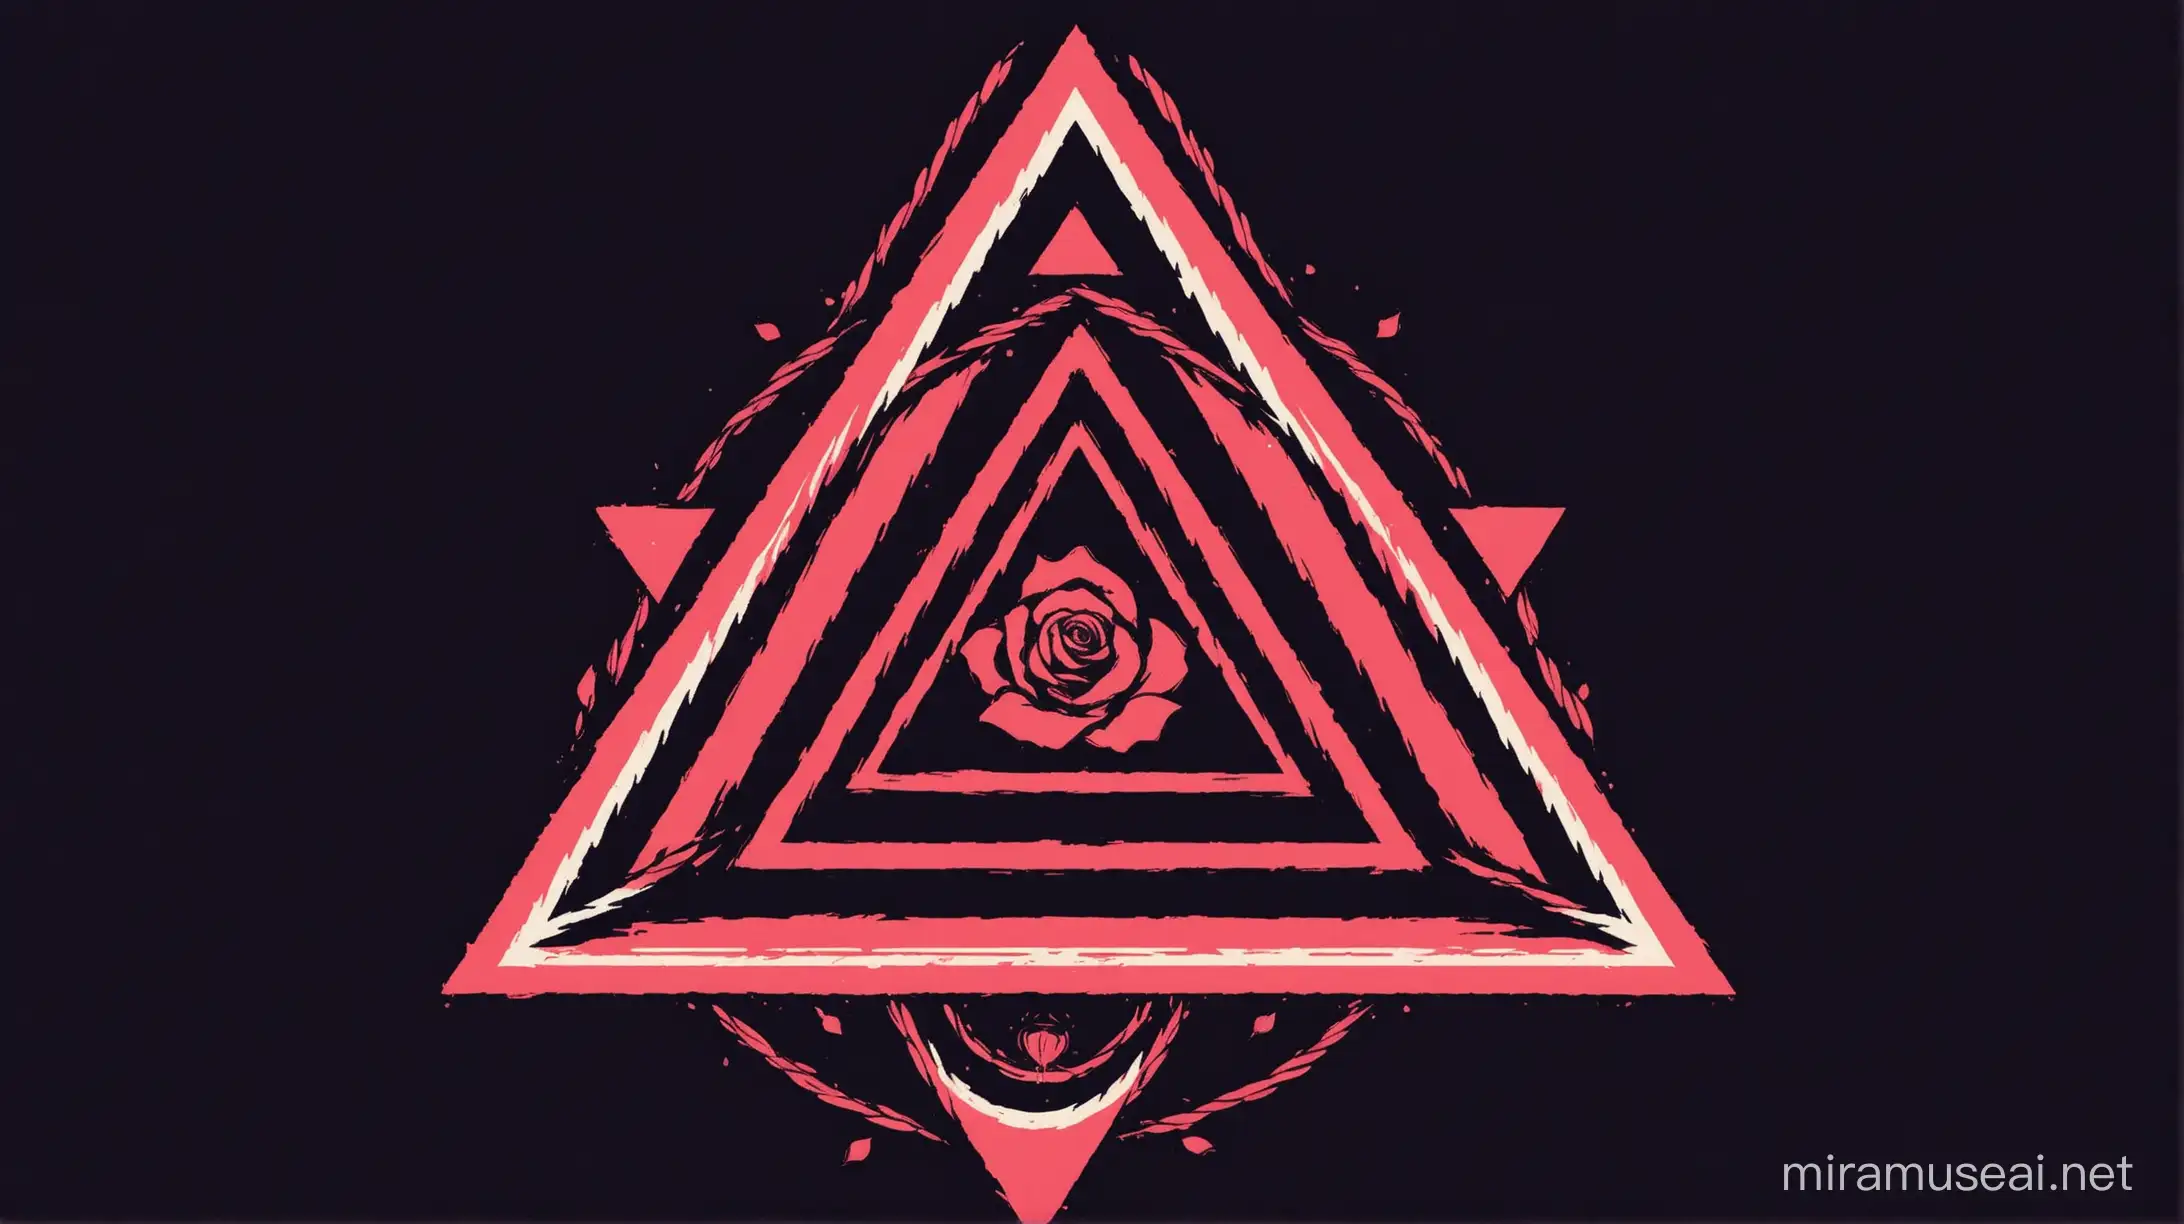 
a logo, a triangle and a rose, some darkness and fear, the name should have bermuda triangle courage, strength, unity (THIS LOGO MUST BE PERFECT)